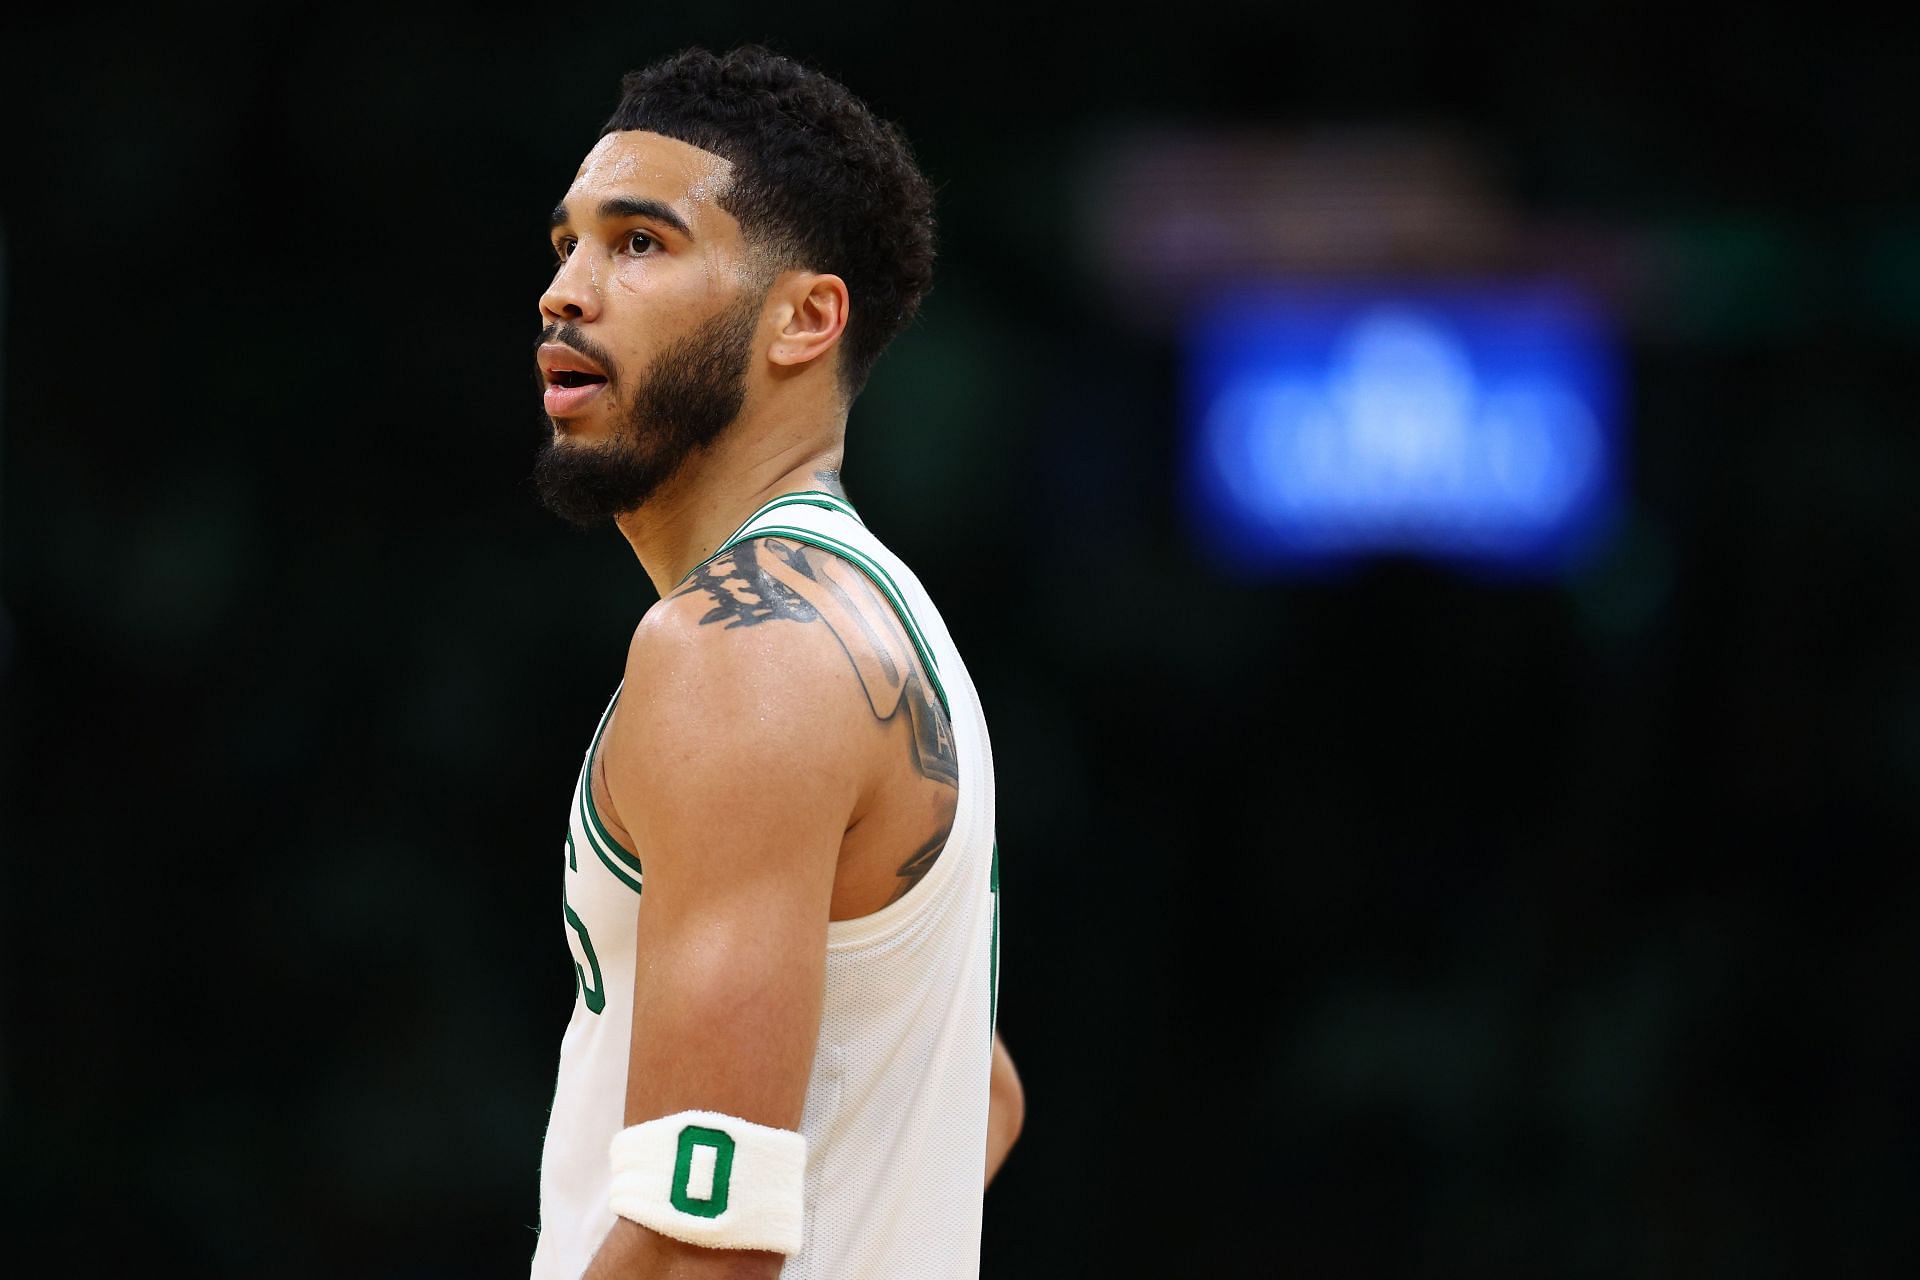 Jayson Tatum needs to step up and deliver a big performance for the Boston Celtics in Game 6 of the NBA Finals.